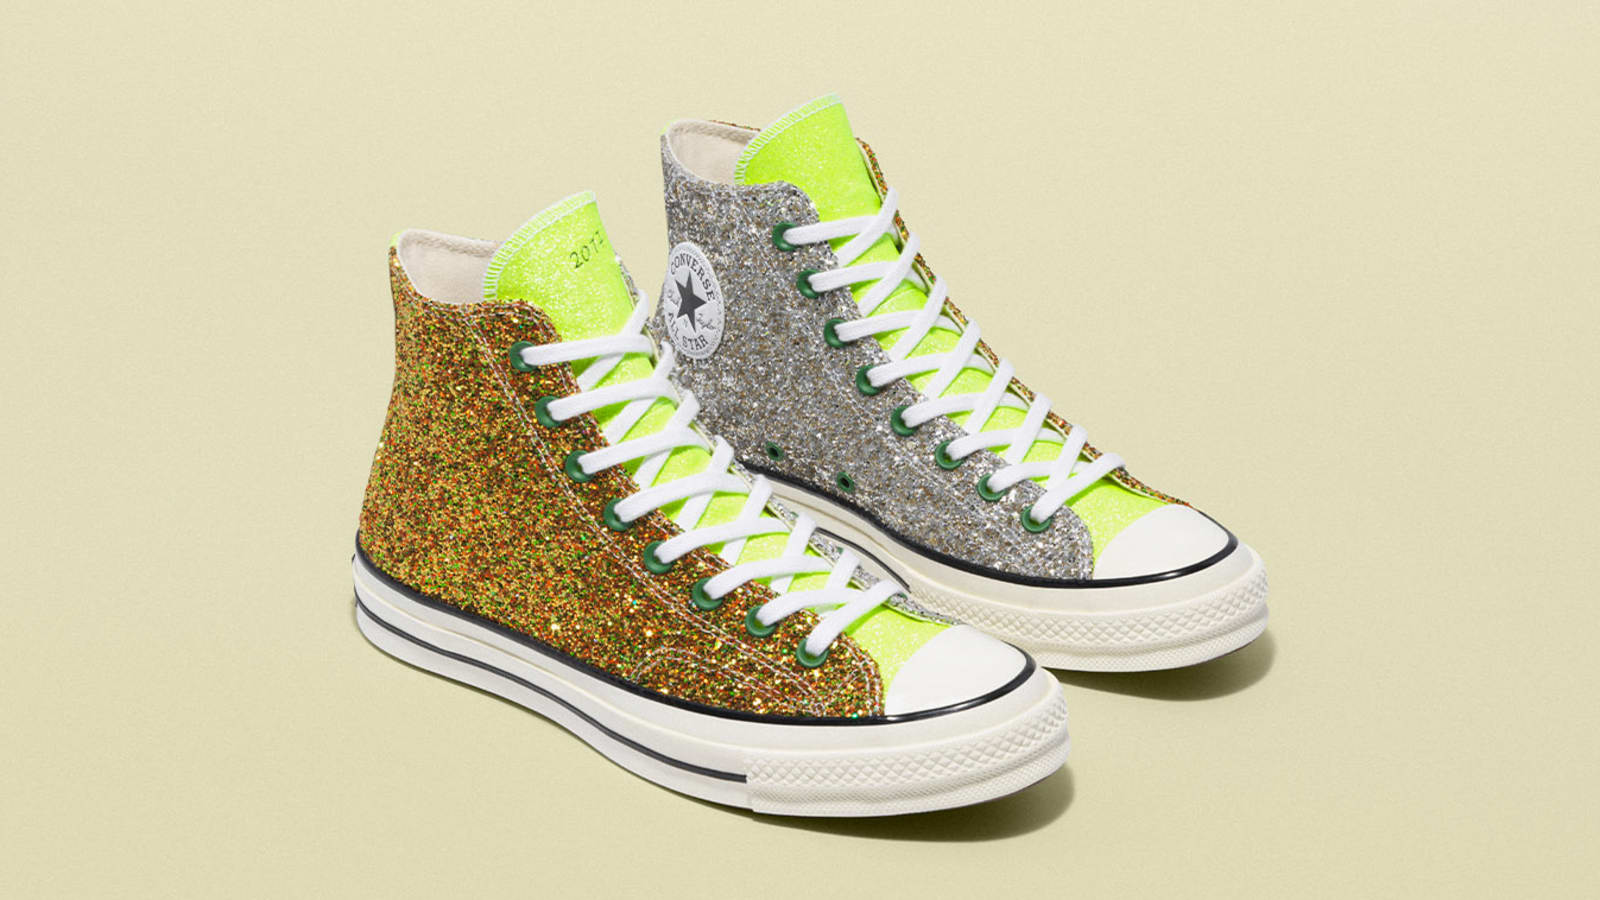 Converse Taps JW Anderson For Three Glittery Chuck 70 Colorways